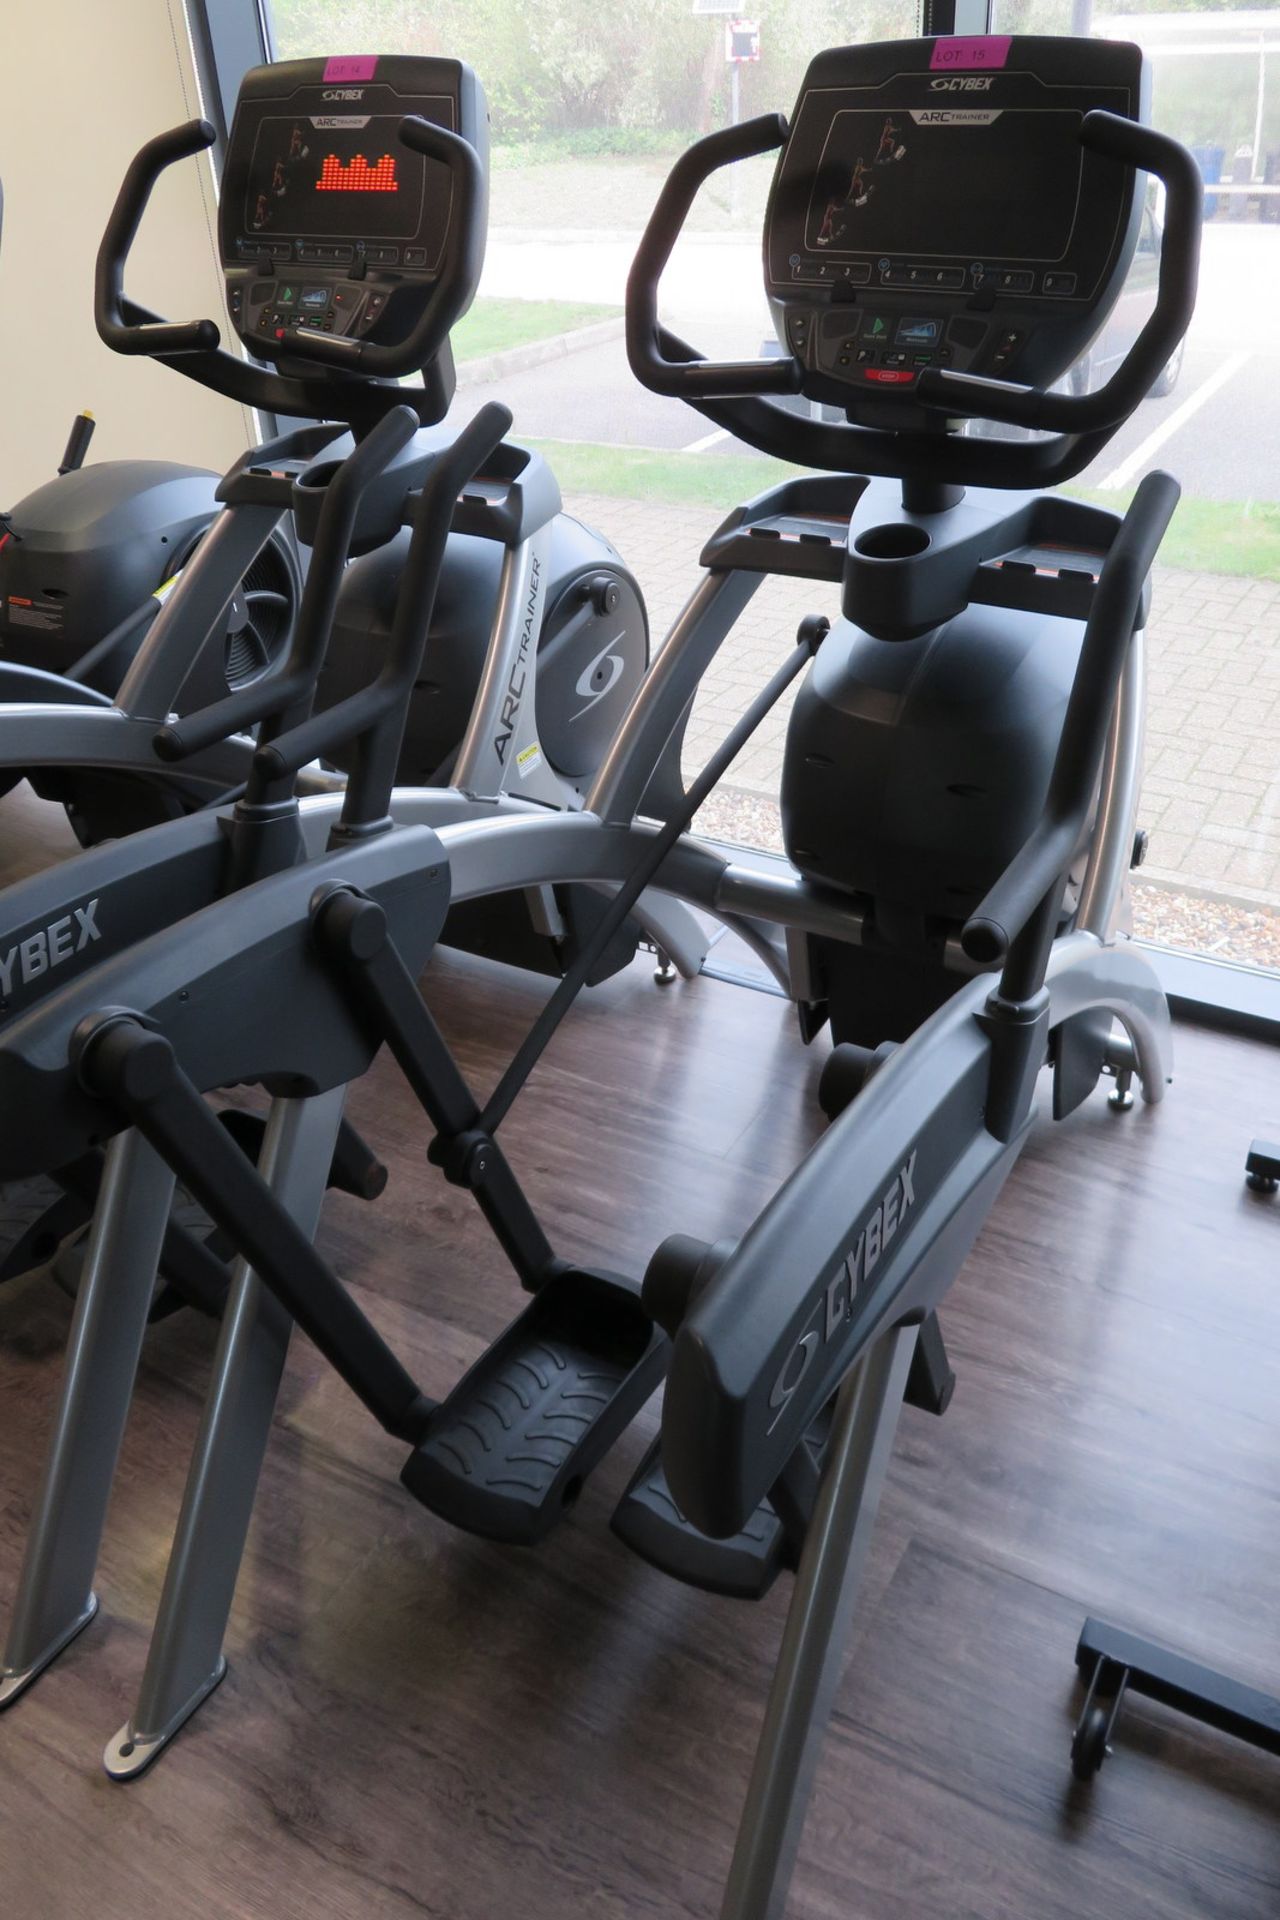 Cybex ARC Trainer High Intensity Trainer. LED Display. Good Working Condition.